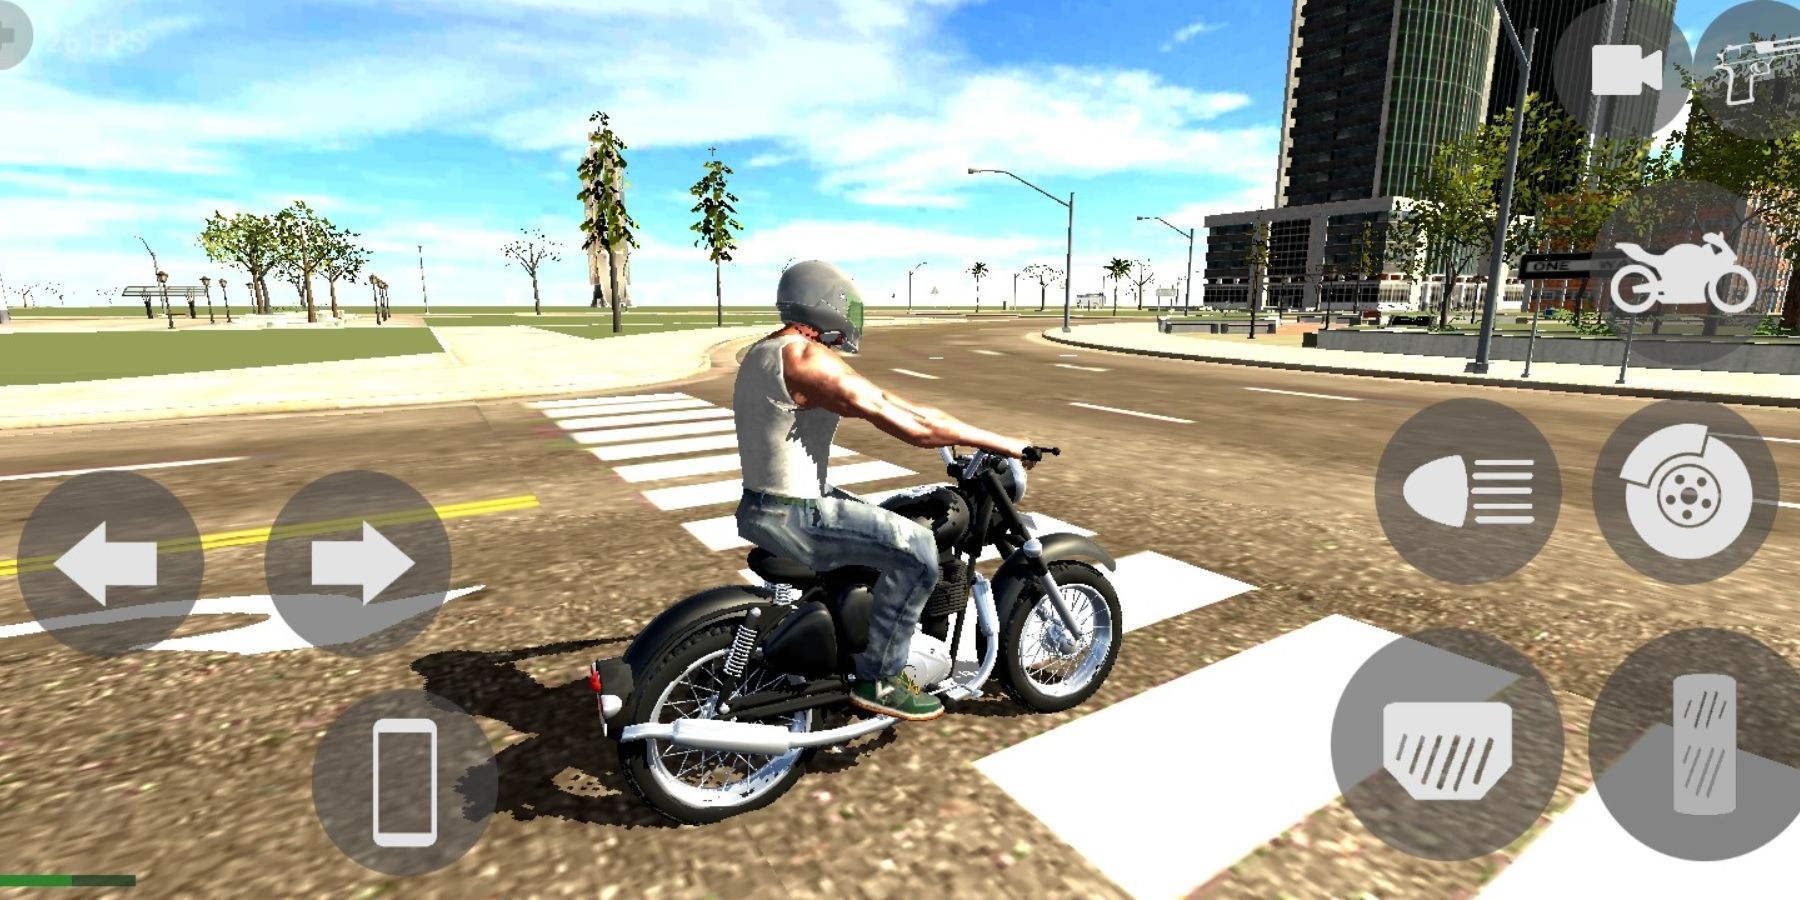 Indian bikes driving 3d коды. Indian Bike Driving 3d читы. Indian Bikes Driving 3d чит коды. Индиан байкс драйвинг 3д. Indian Bikes Driving 3d версия 21.